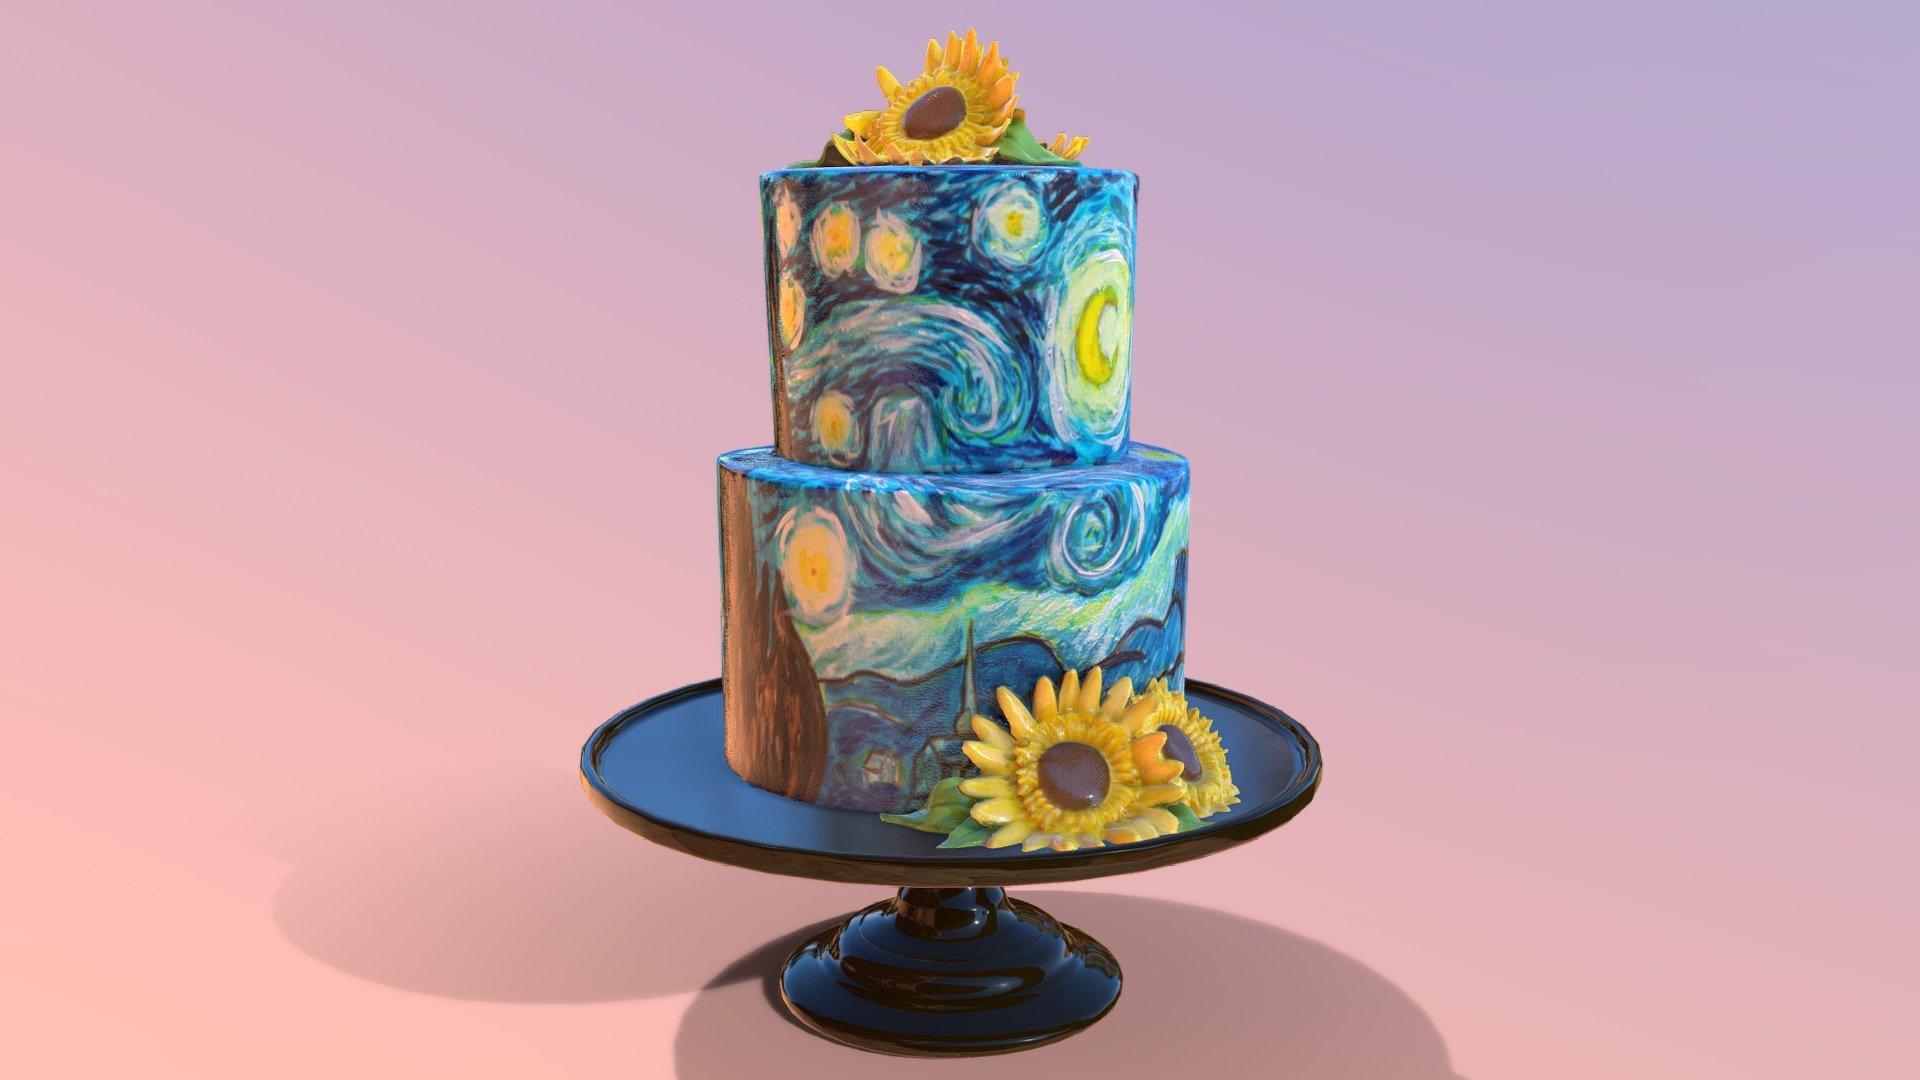 3D scan of a The Starry Nights Buttercream Cake on the mosser stand which is made by CAKESBURG Online Premium Cake Shop in UK.

The Starry Night is an oil-on-canvas painting by the Dutch Post-Impressionist painter Vincent van Gogh. Painted in June 1889, it depicts the view from the east-facing window of his asylum room at Saint-Rémy-de-Provence, just before sunrise, with the addition of an imaginary village. Wikipedia

You can also order real cake from this link: https://cakesburg.co.uk/products/van-gogh-starry-night-cake?_pos=1&amp;_sid=b84a78c0f&amp;_ss=r

Cake Textures - 4096*4096px PBR photoscan-based materials (Base Color, Normal, Roughness, Specular, AO) - Van Gogh - Starry Night Cake - Buy Royalty Free 3D model by Cakesburg Premium 3D Cake Shop (@Viscom_Cakesburg) 3d model